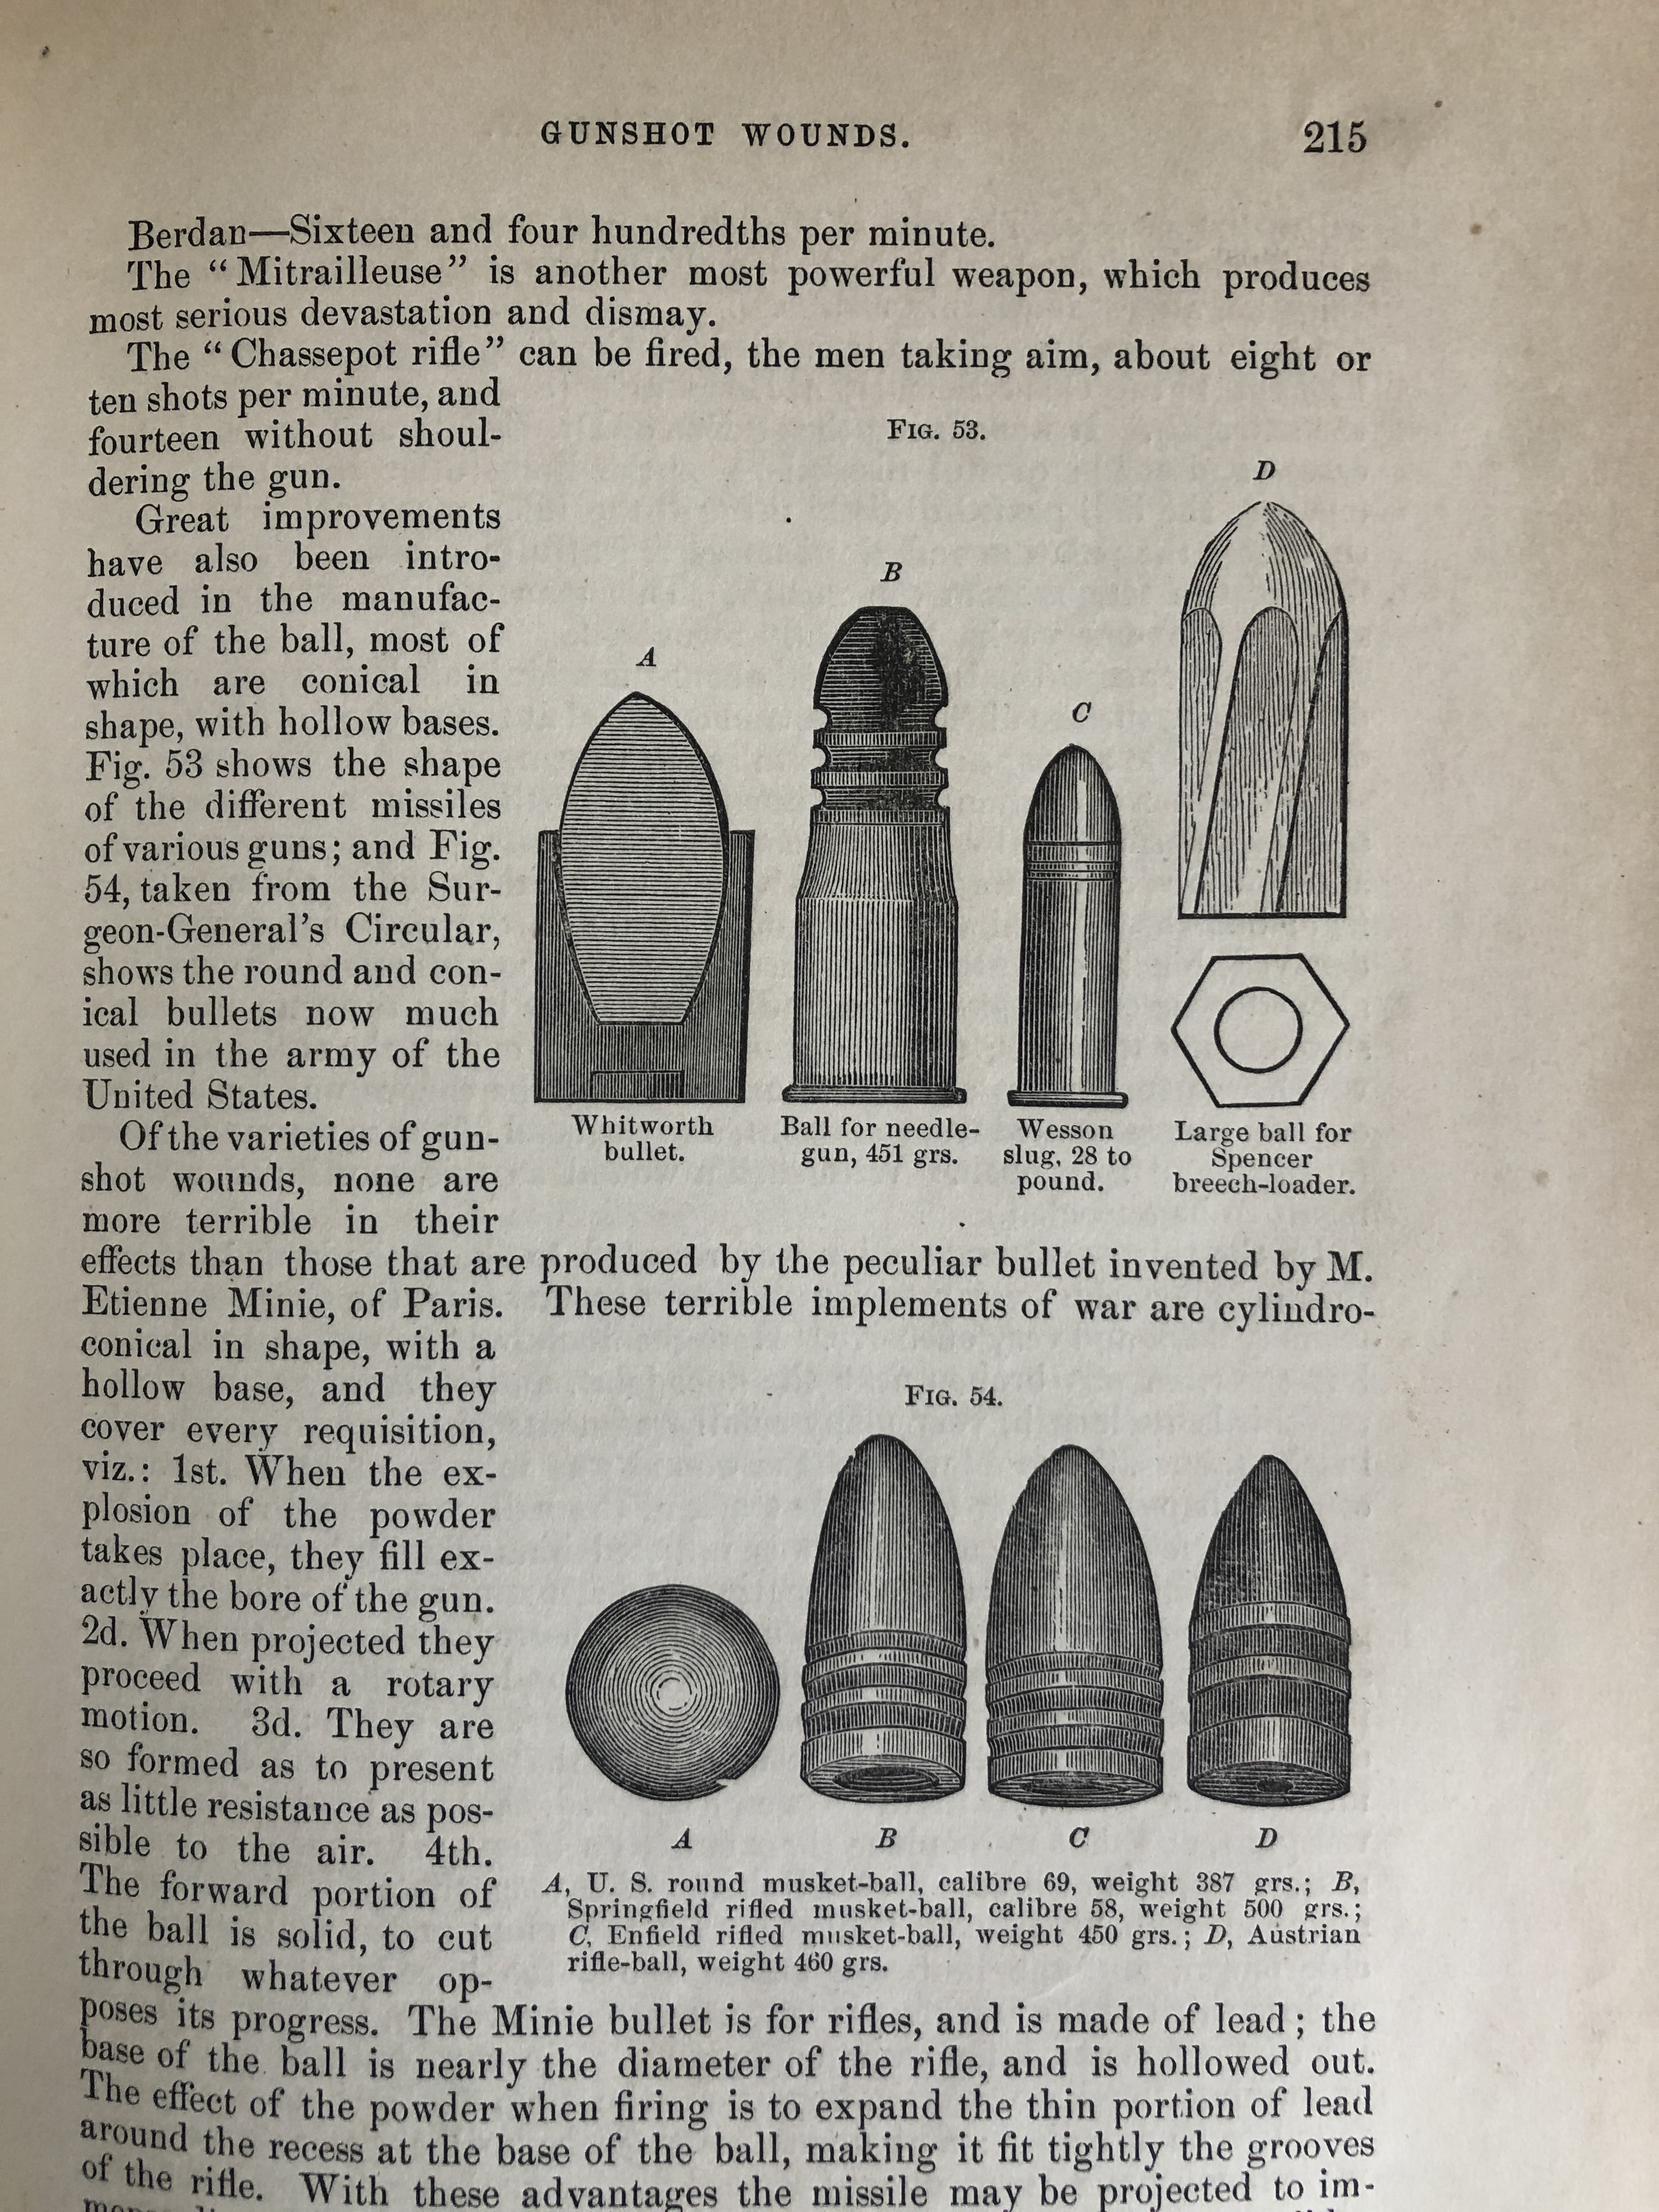 Portion of page 215 displays images and writing under the chapter, “Gunshot Wounds”. Images show eight drawings of bullets from American Civil War era, including variations on the American musket ball. 
